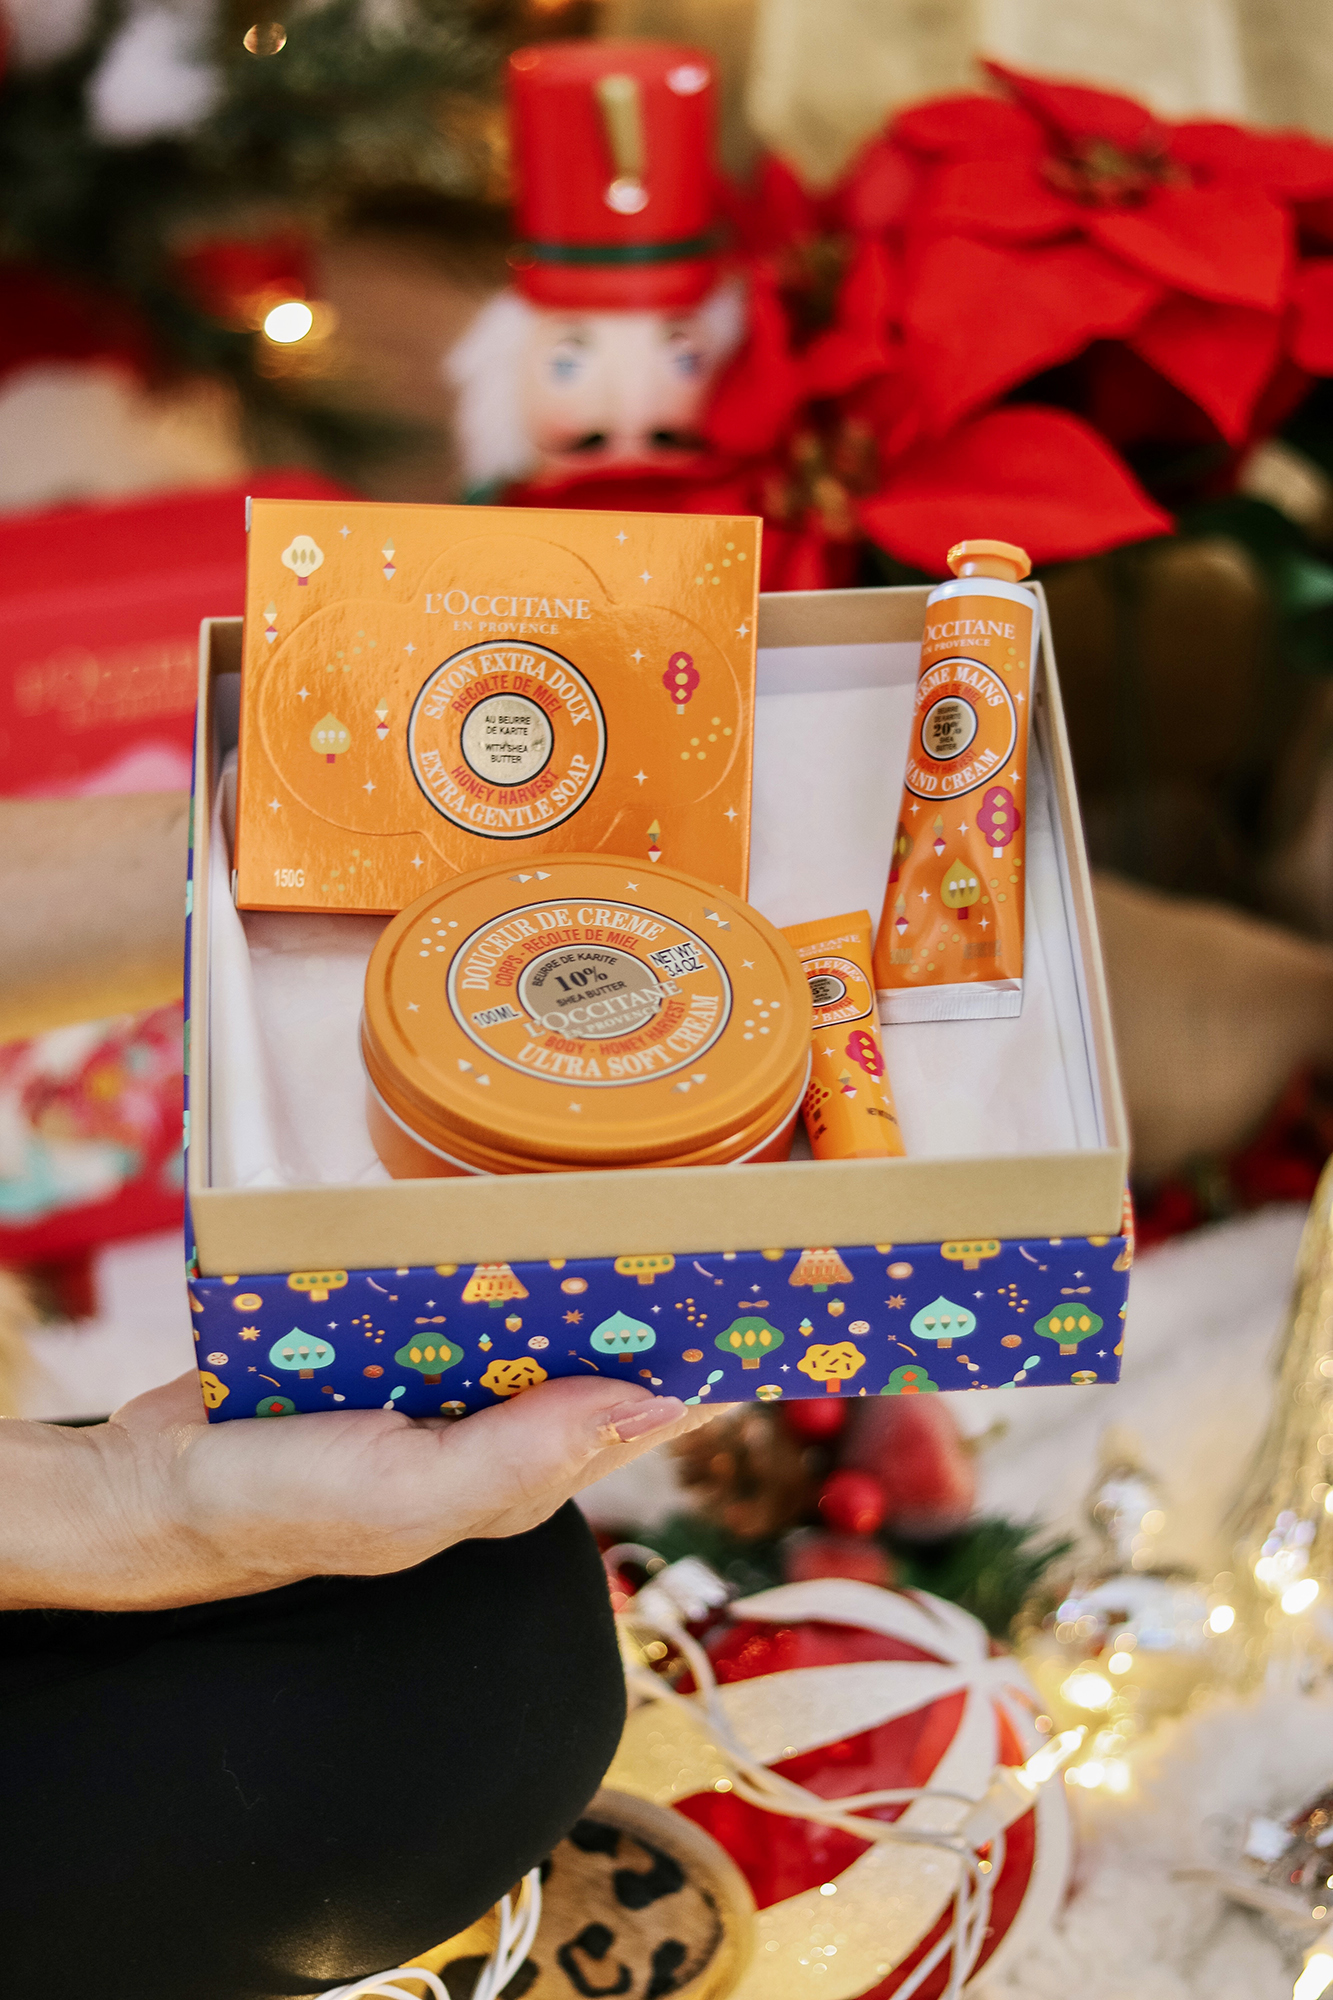 L'Occitane Holiday Beauty Gift Set Guide 2019 - Affordable & on-sale beauty gifts from the French company L'Occitane! All so beautiful. 